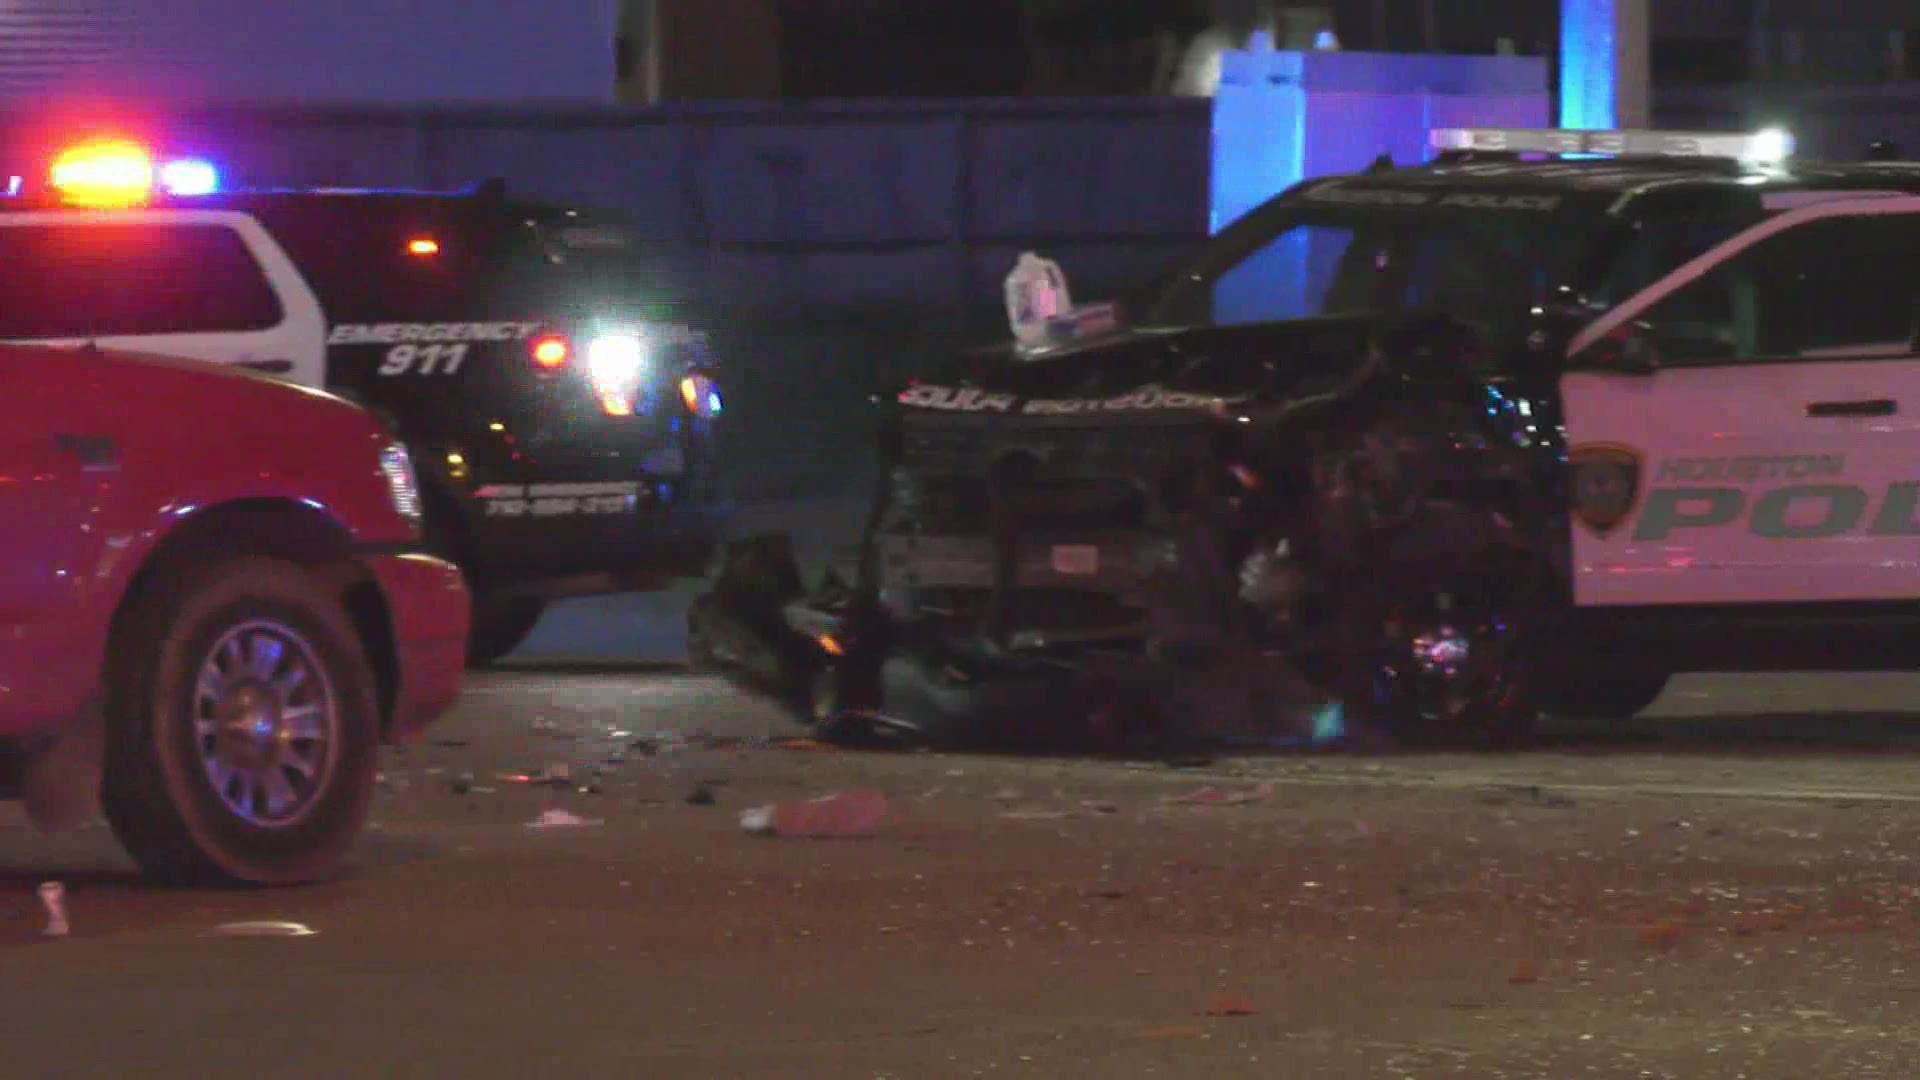 The Houston Police Department said an intoxicated woman was arrested early Sunday morning after running a red light and causing a crash involving two officers.